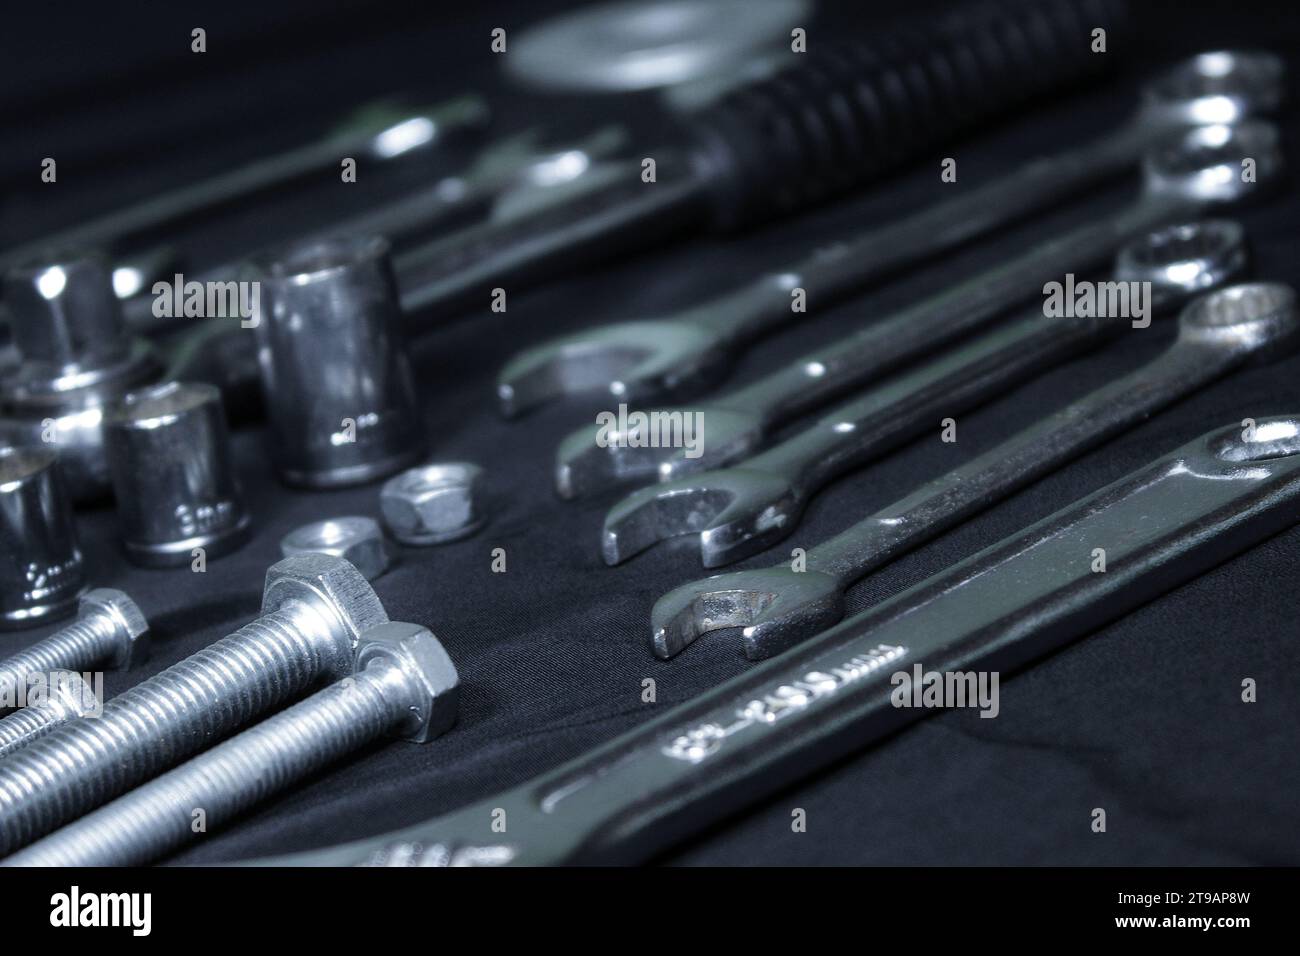 Set Of Hand Tools, Sockets, Nuts And Bolts Ready To Repairing Work Process Stock Photo